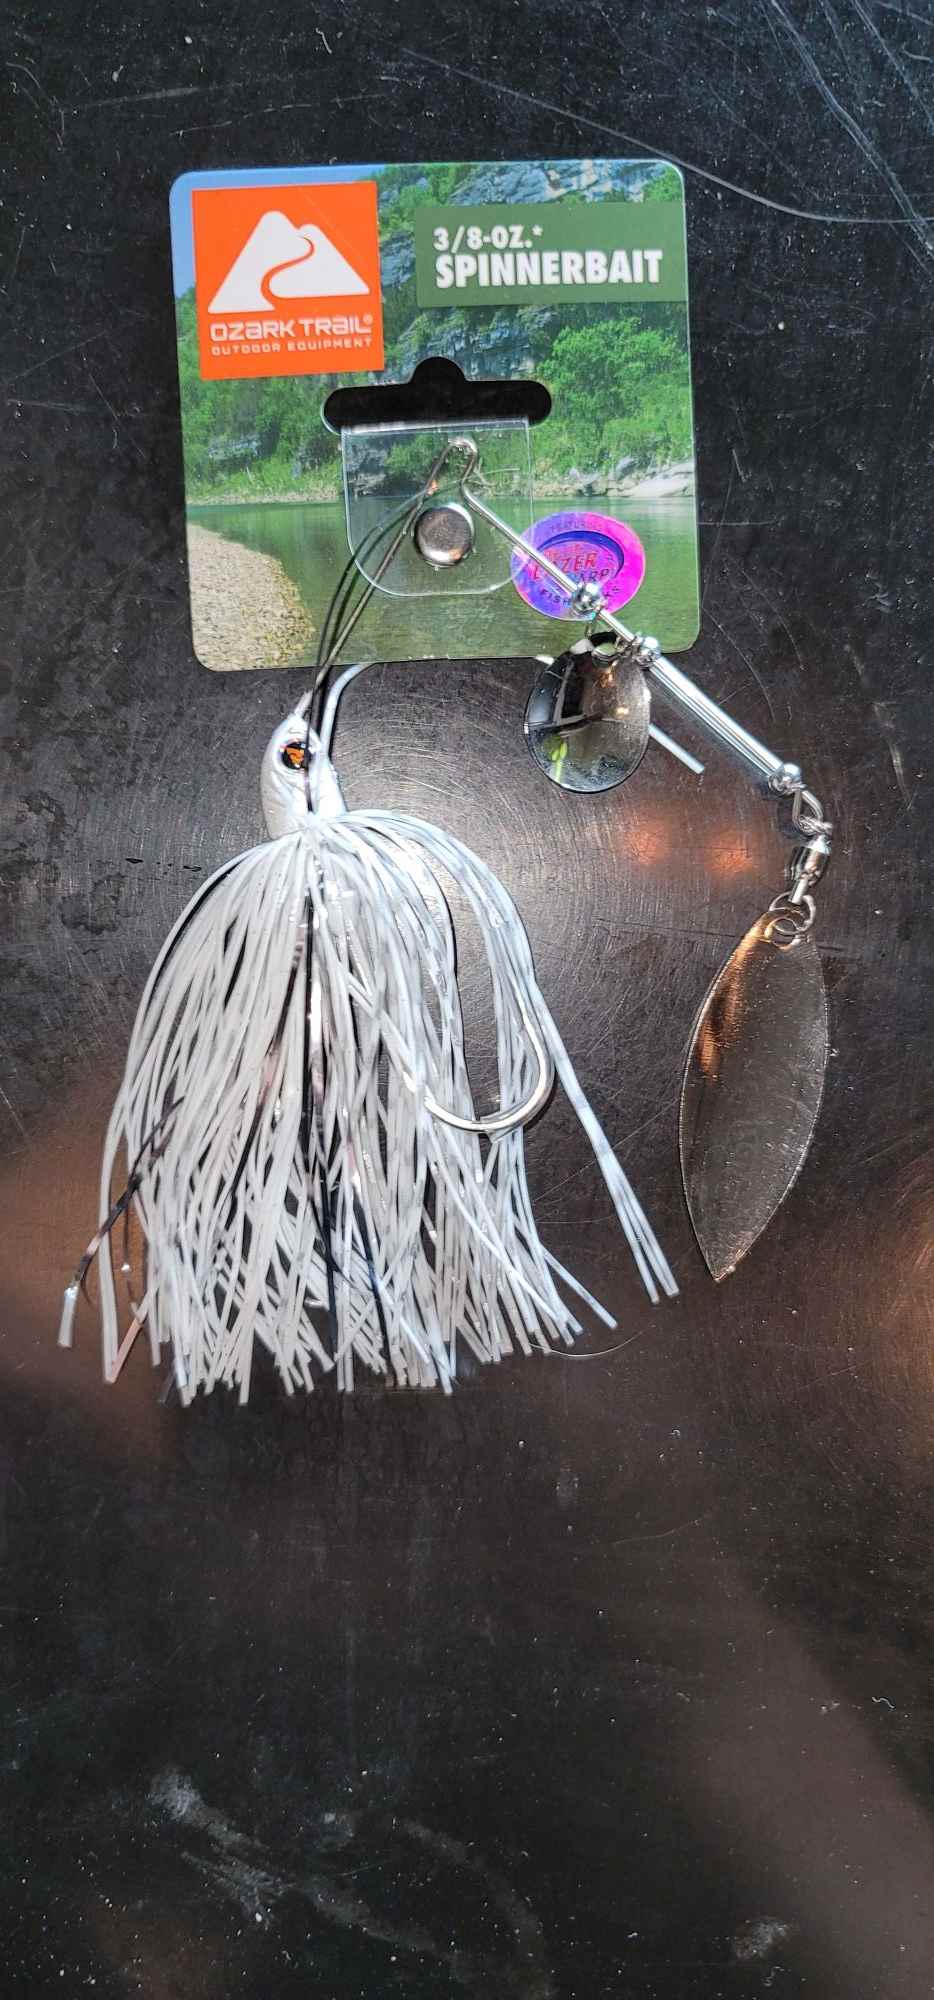 Ozark Trail Spinnerbaits - Fishing Tackle - Bass Fishing Forums